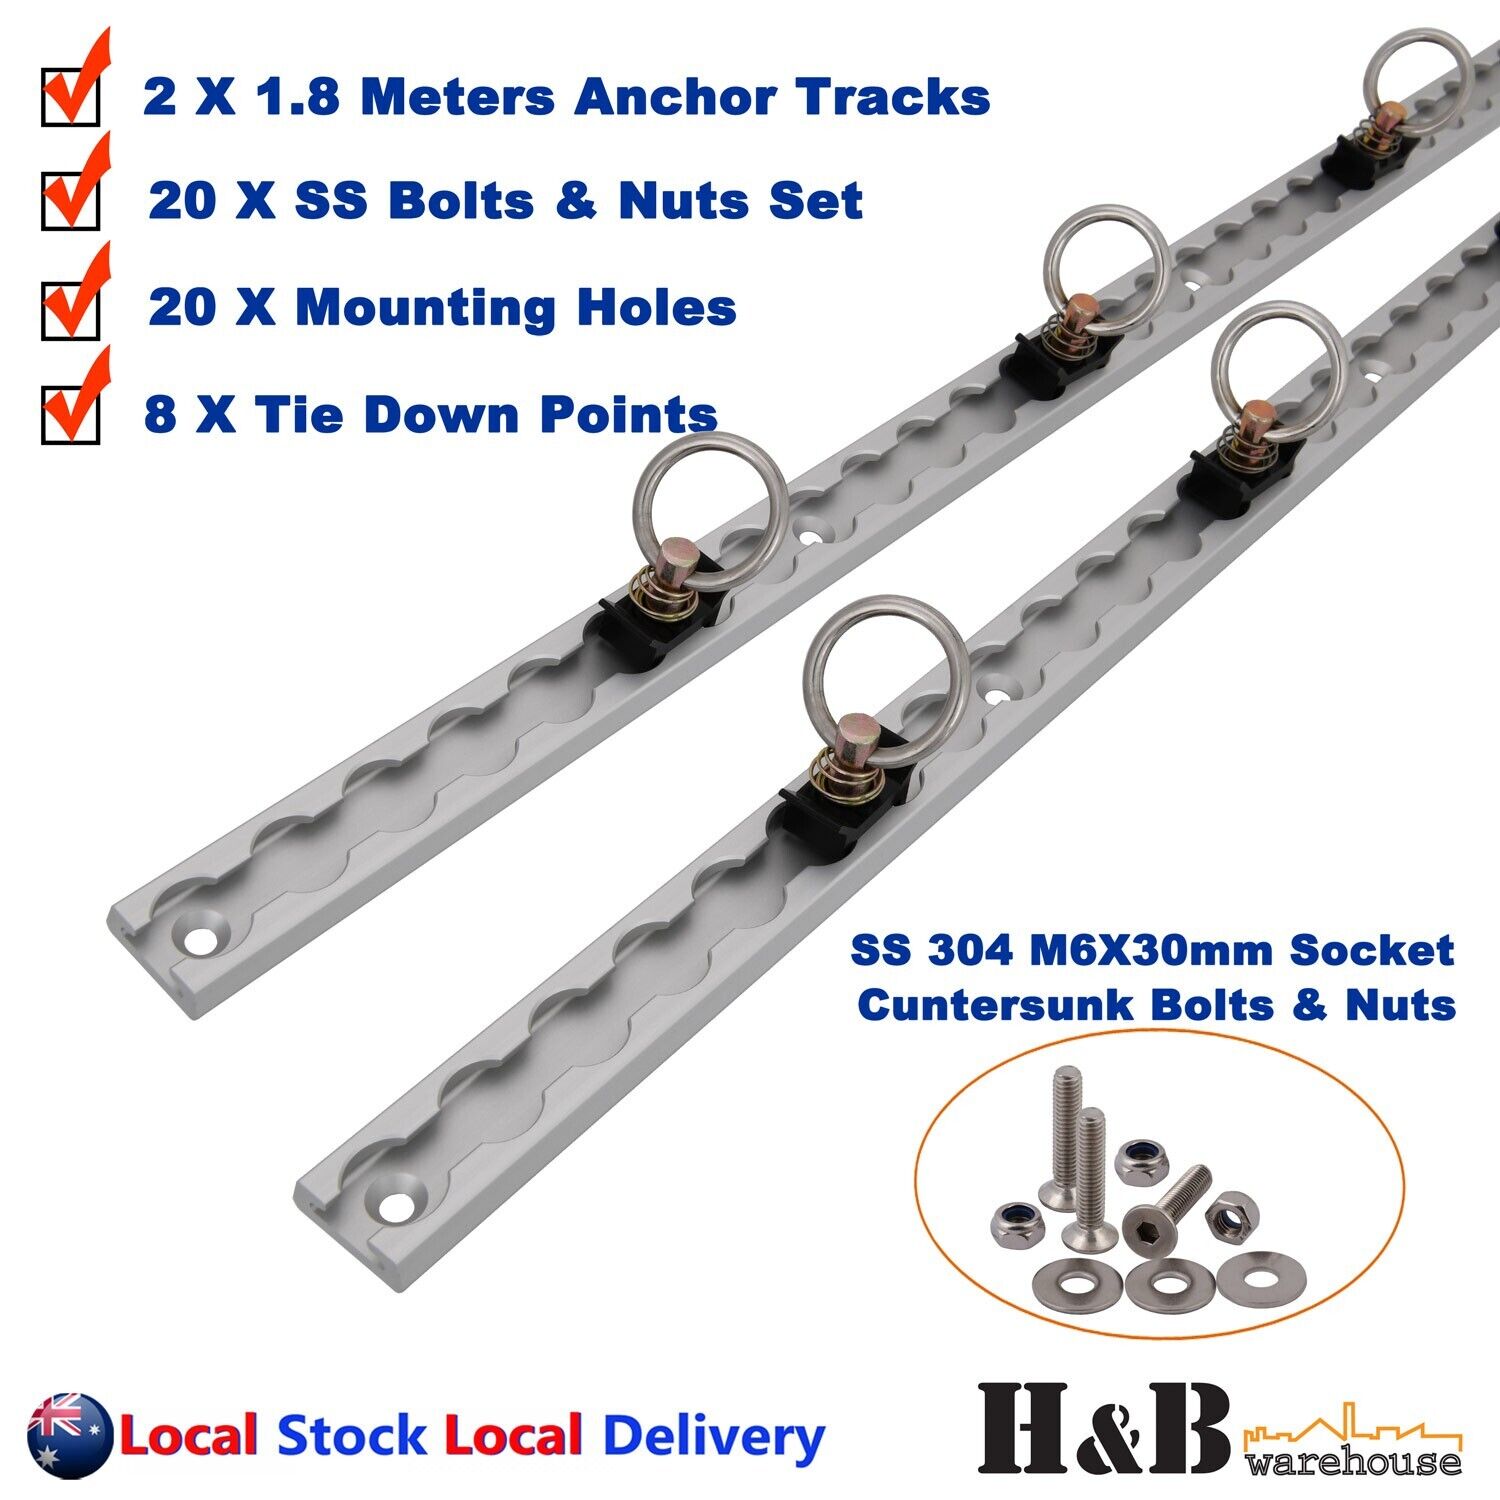 (2Tracks+8Rings) 1.8M L Track Anchor Track